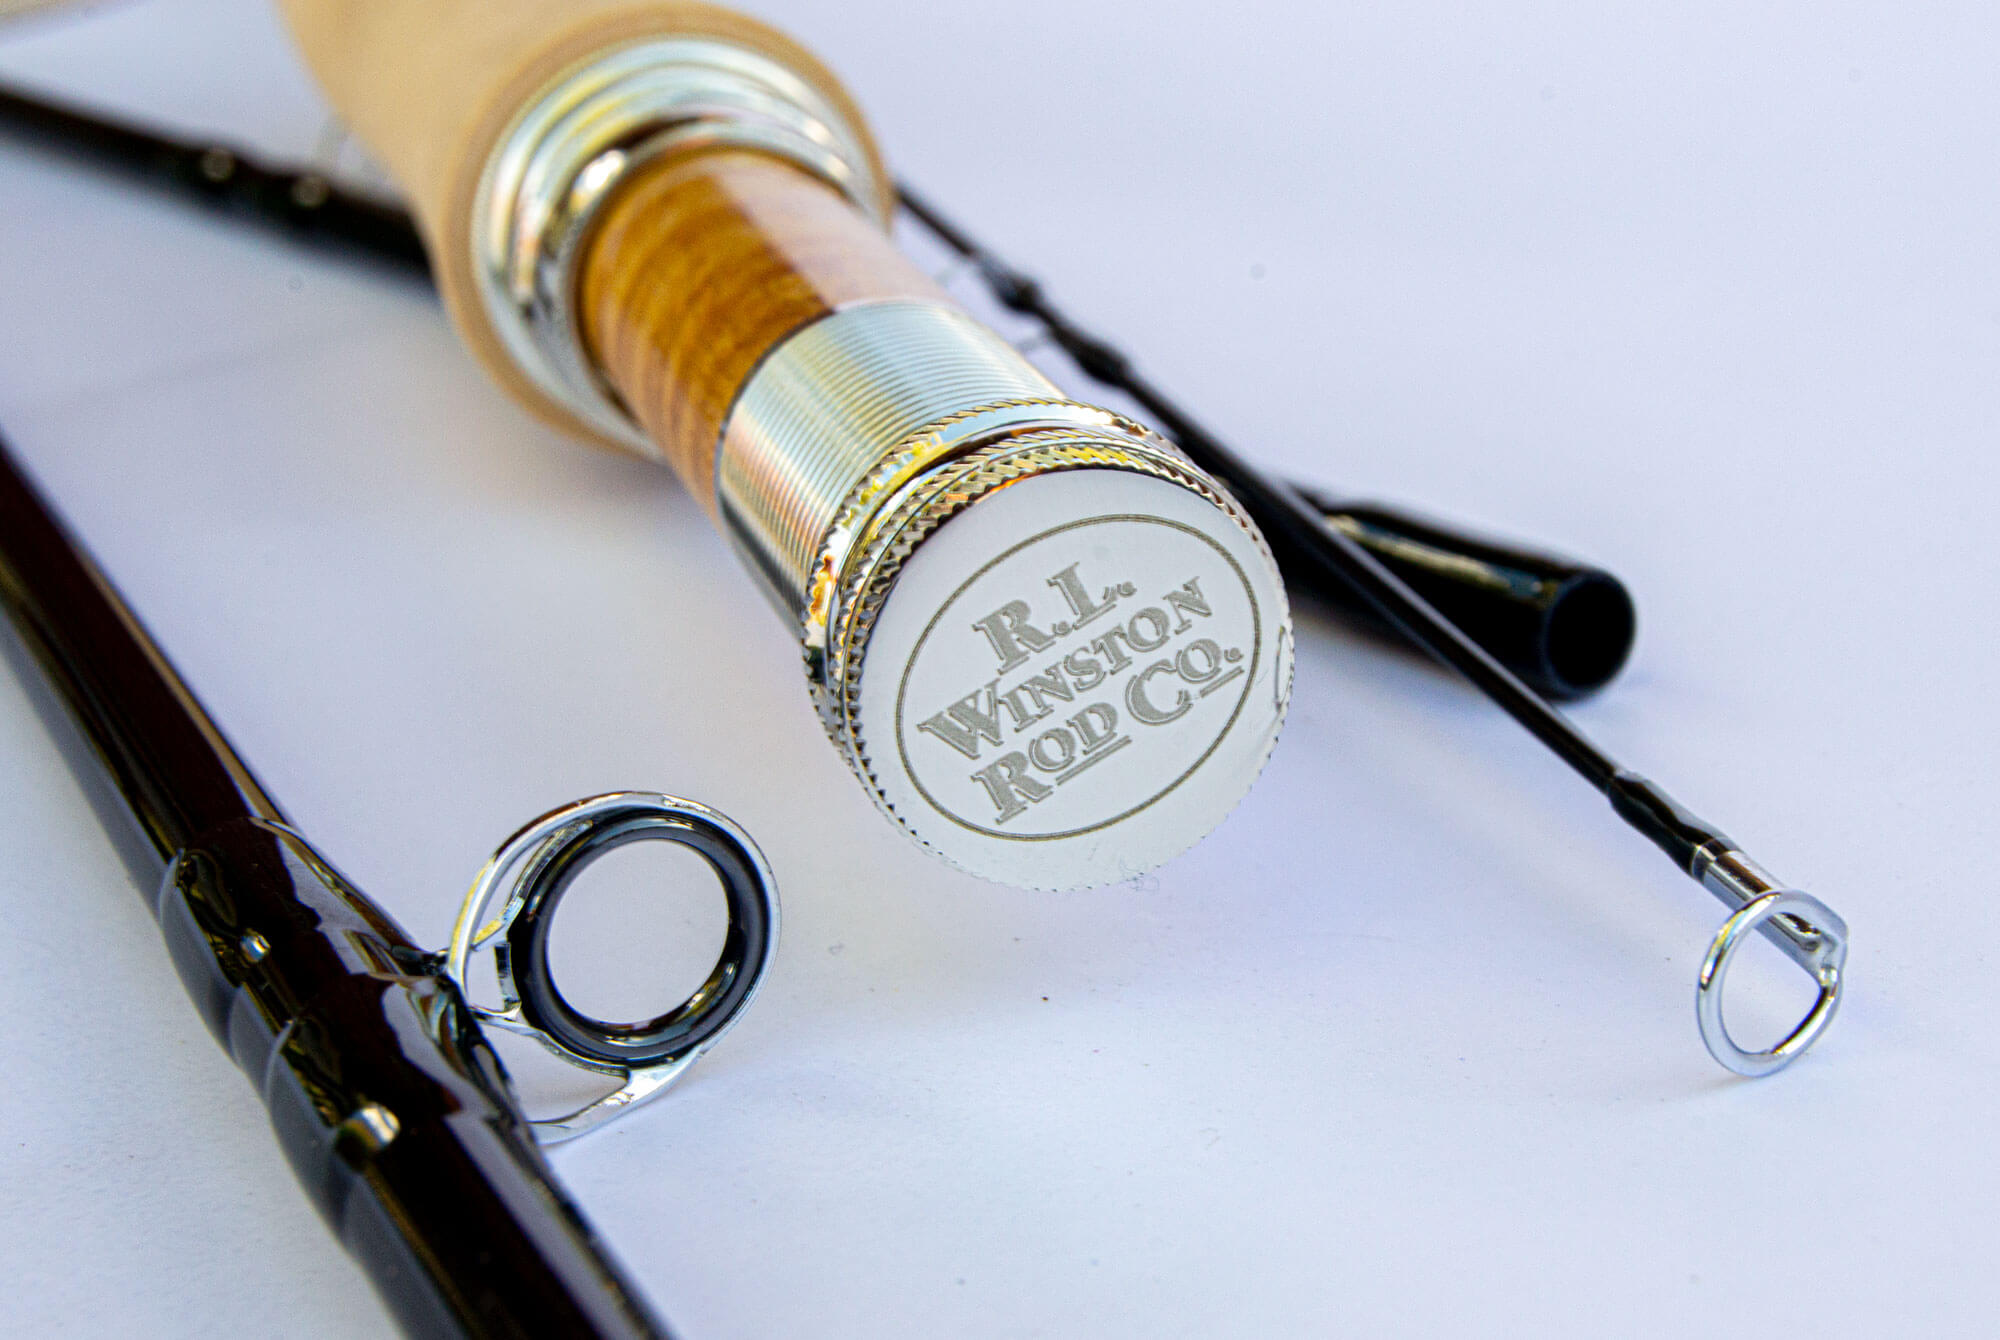 Winston Pure 7'6 3-weight fly rod